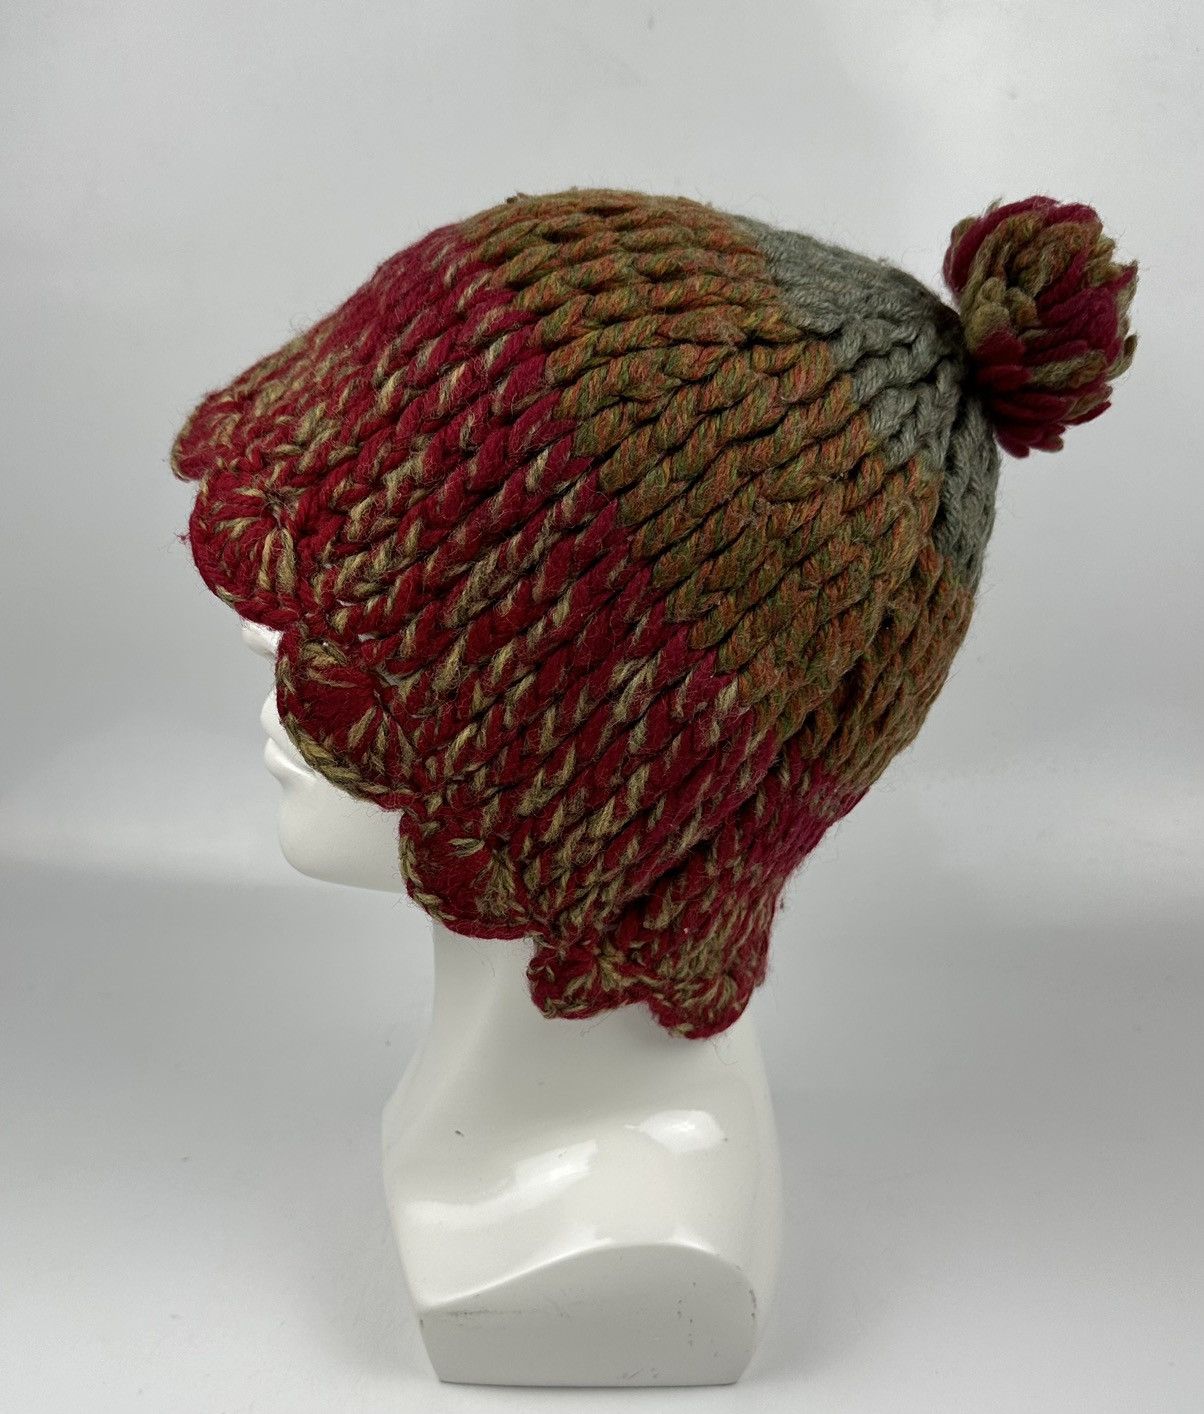 custom made knitted hat tg3 - 3